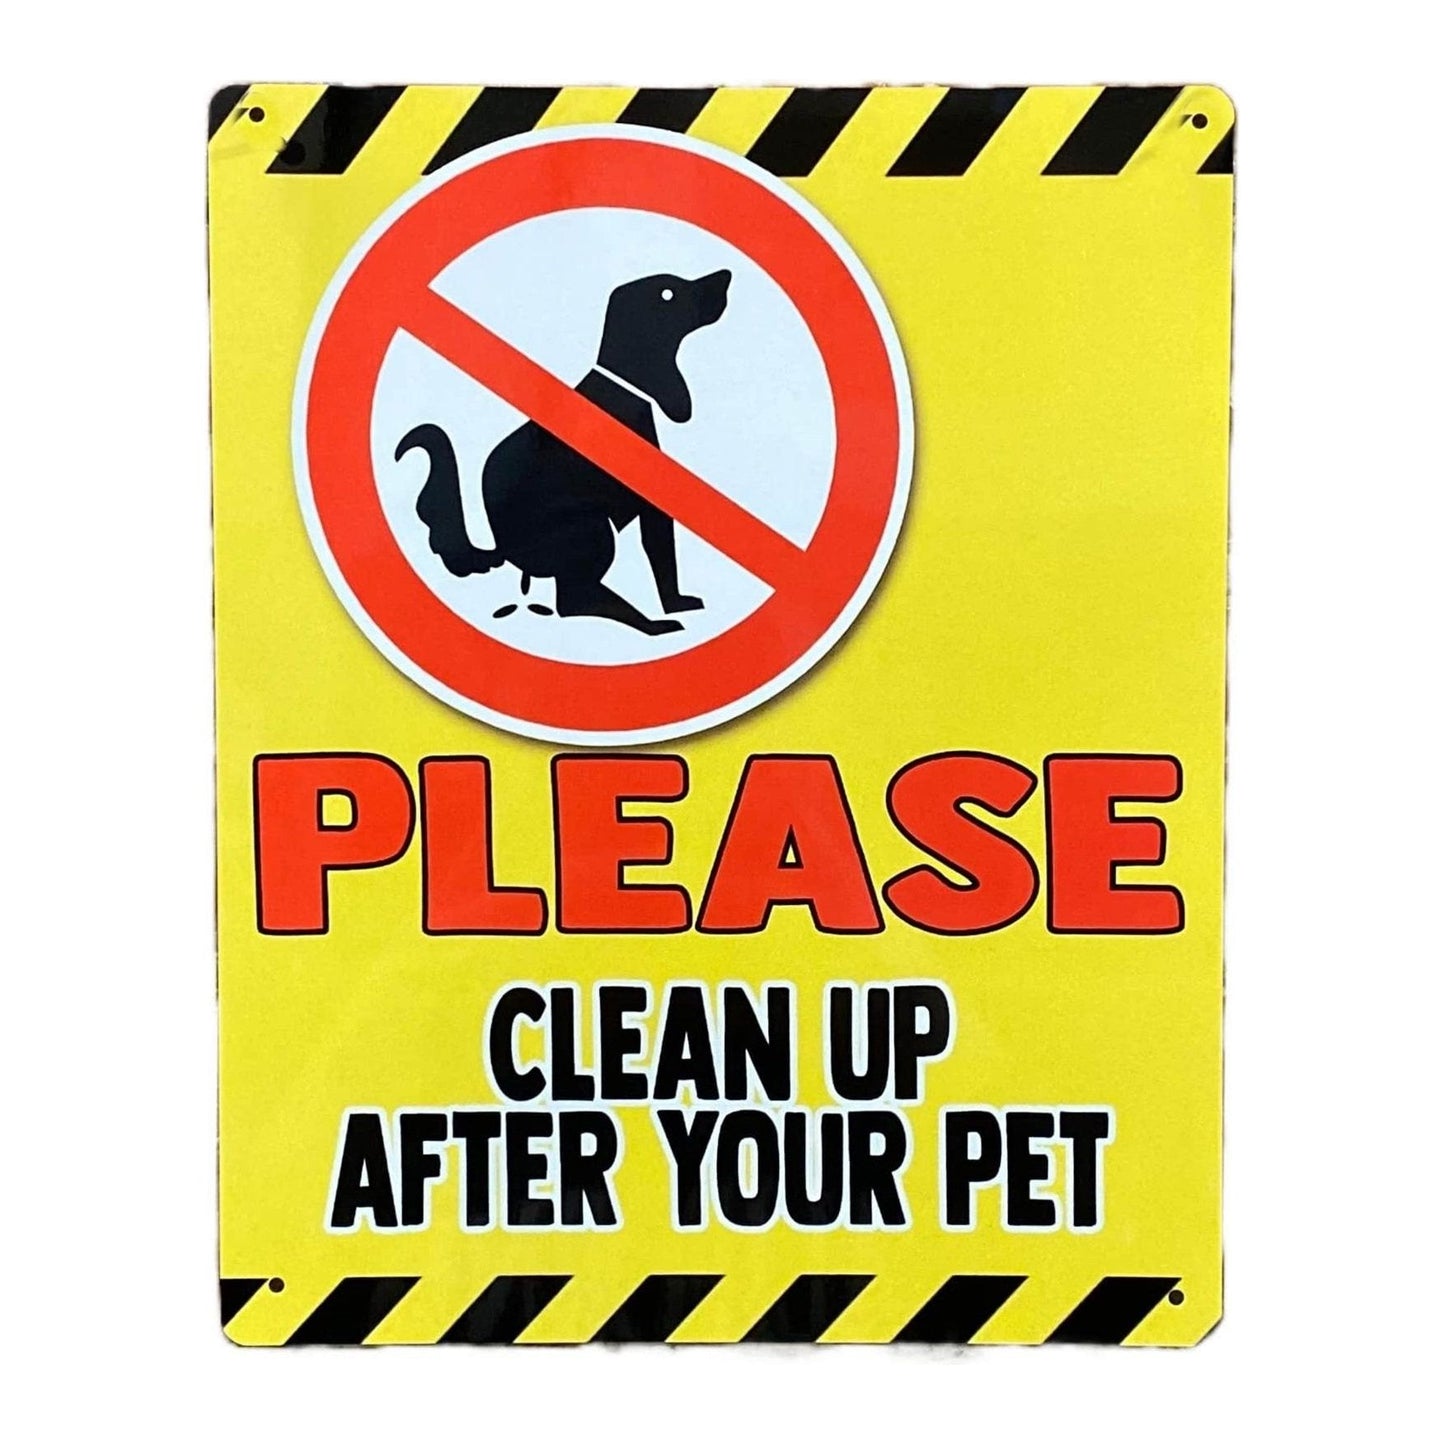 Metal Advertising Wall Sign - Please Clean Up After Your Pet - Dog Poo - Ashton and Finch